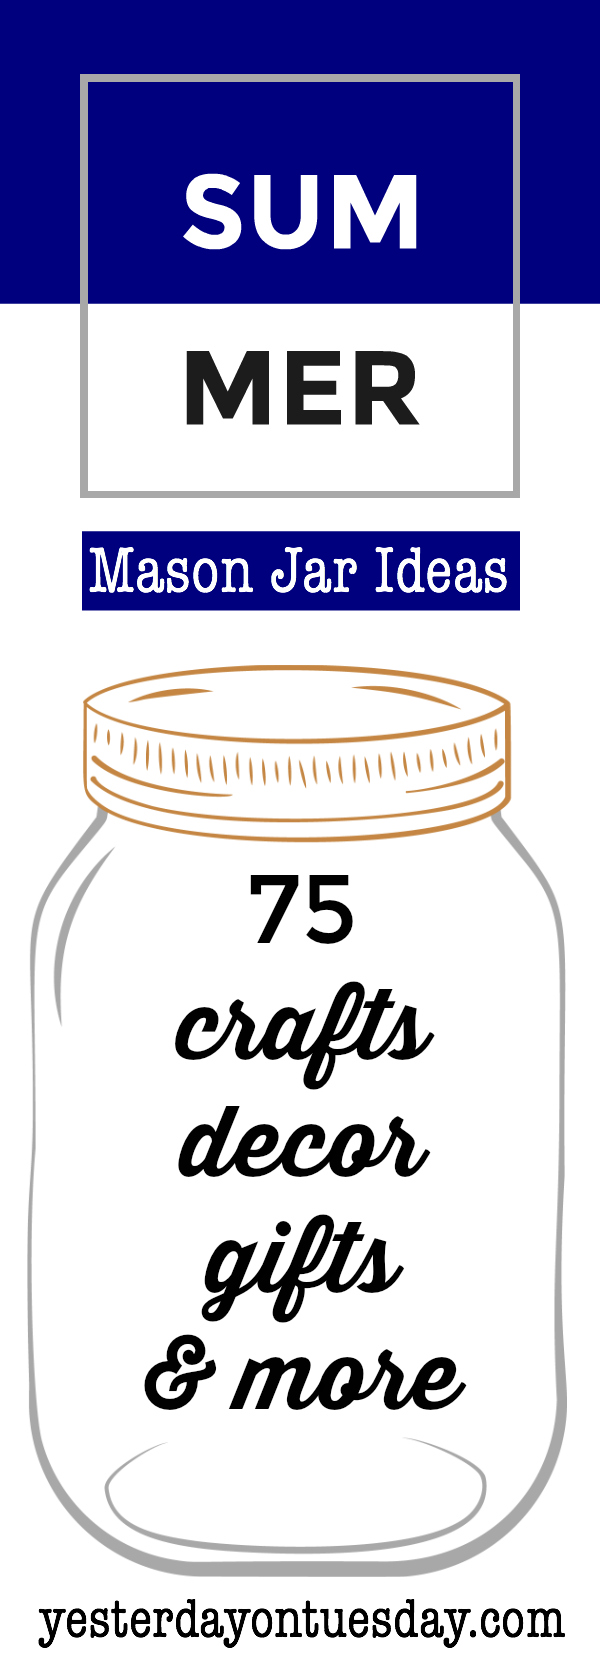 75 Summer Mason Jar Ideas including kid's activities, crafts, decor, recipes and more!